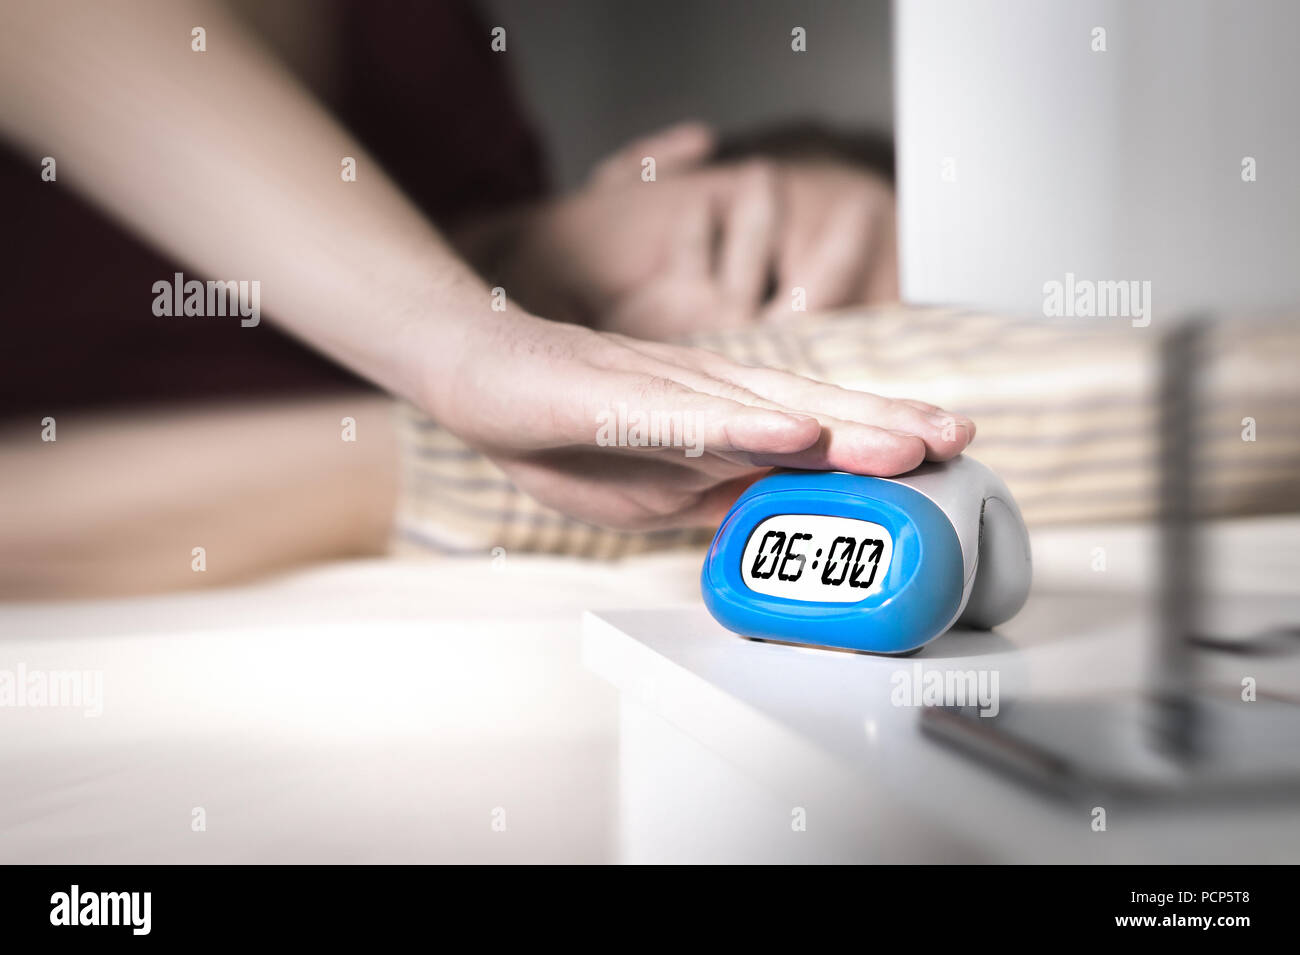 Man don't want to wake up for work in the morning. Turning off alarm clock or press snooze button with hand. Lazy person unable to get out of bed. Stock Photo